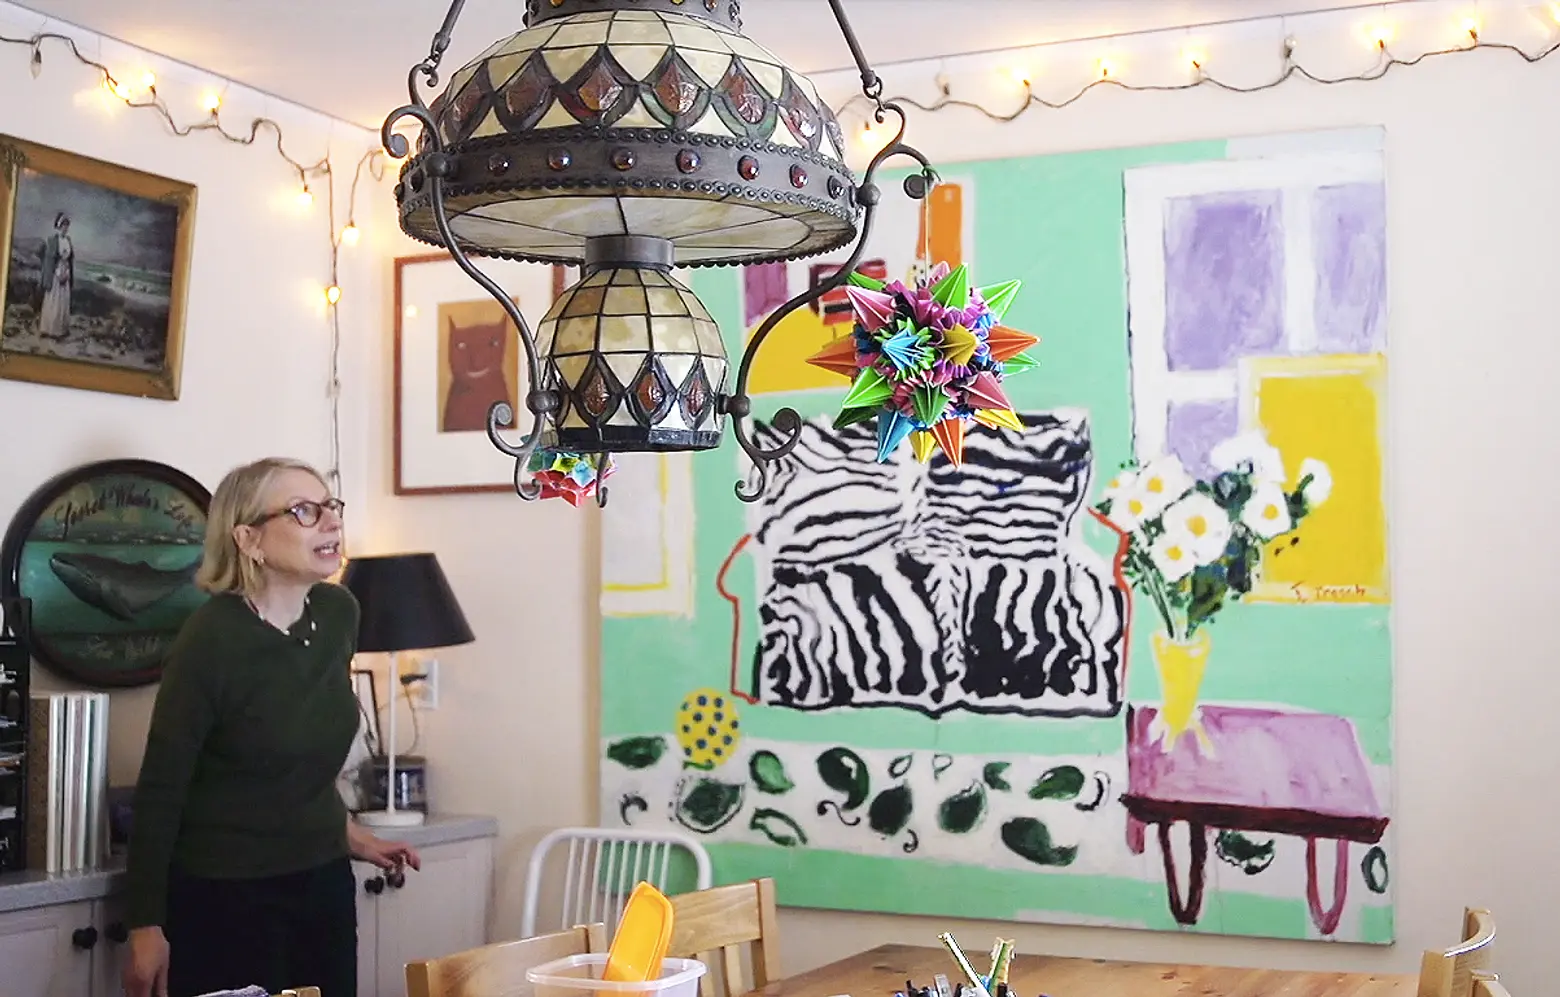 VIDEO: Tour New Yorker Staff Cartoonist Roz Chast’s Connecticut Home and Studio